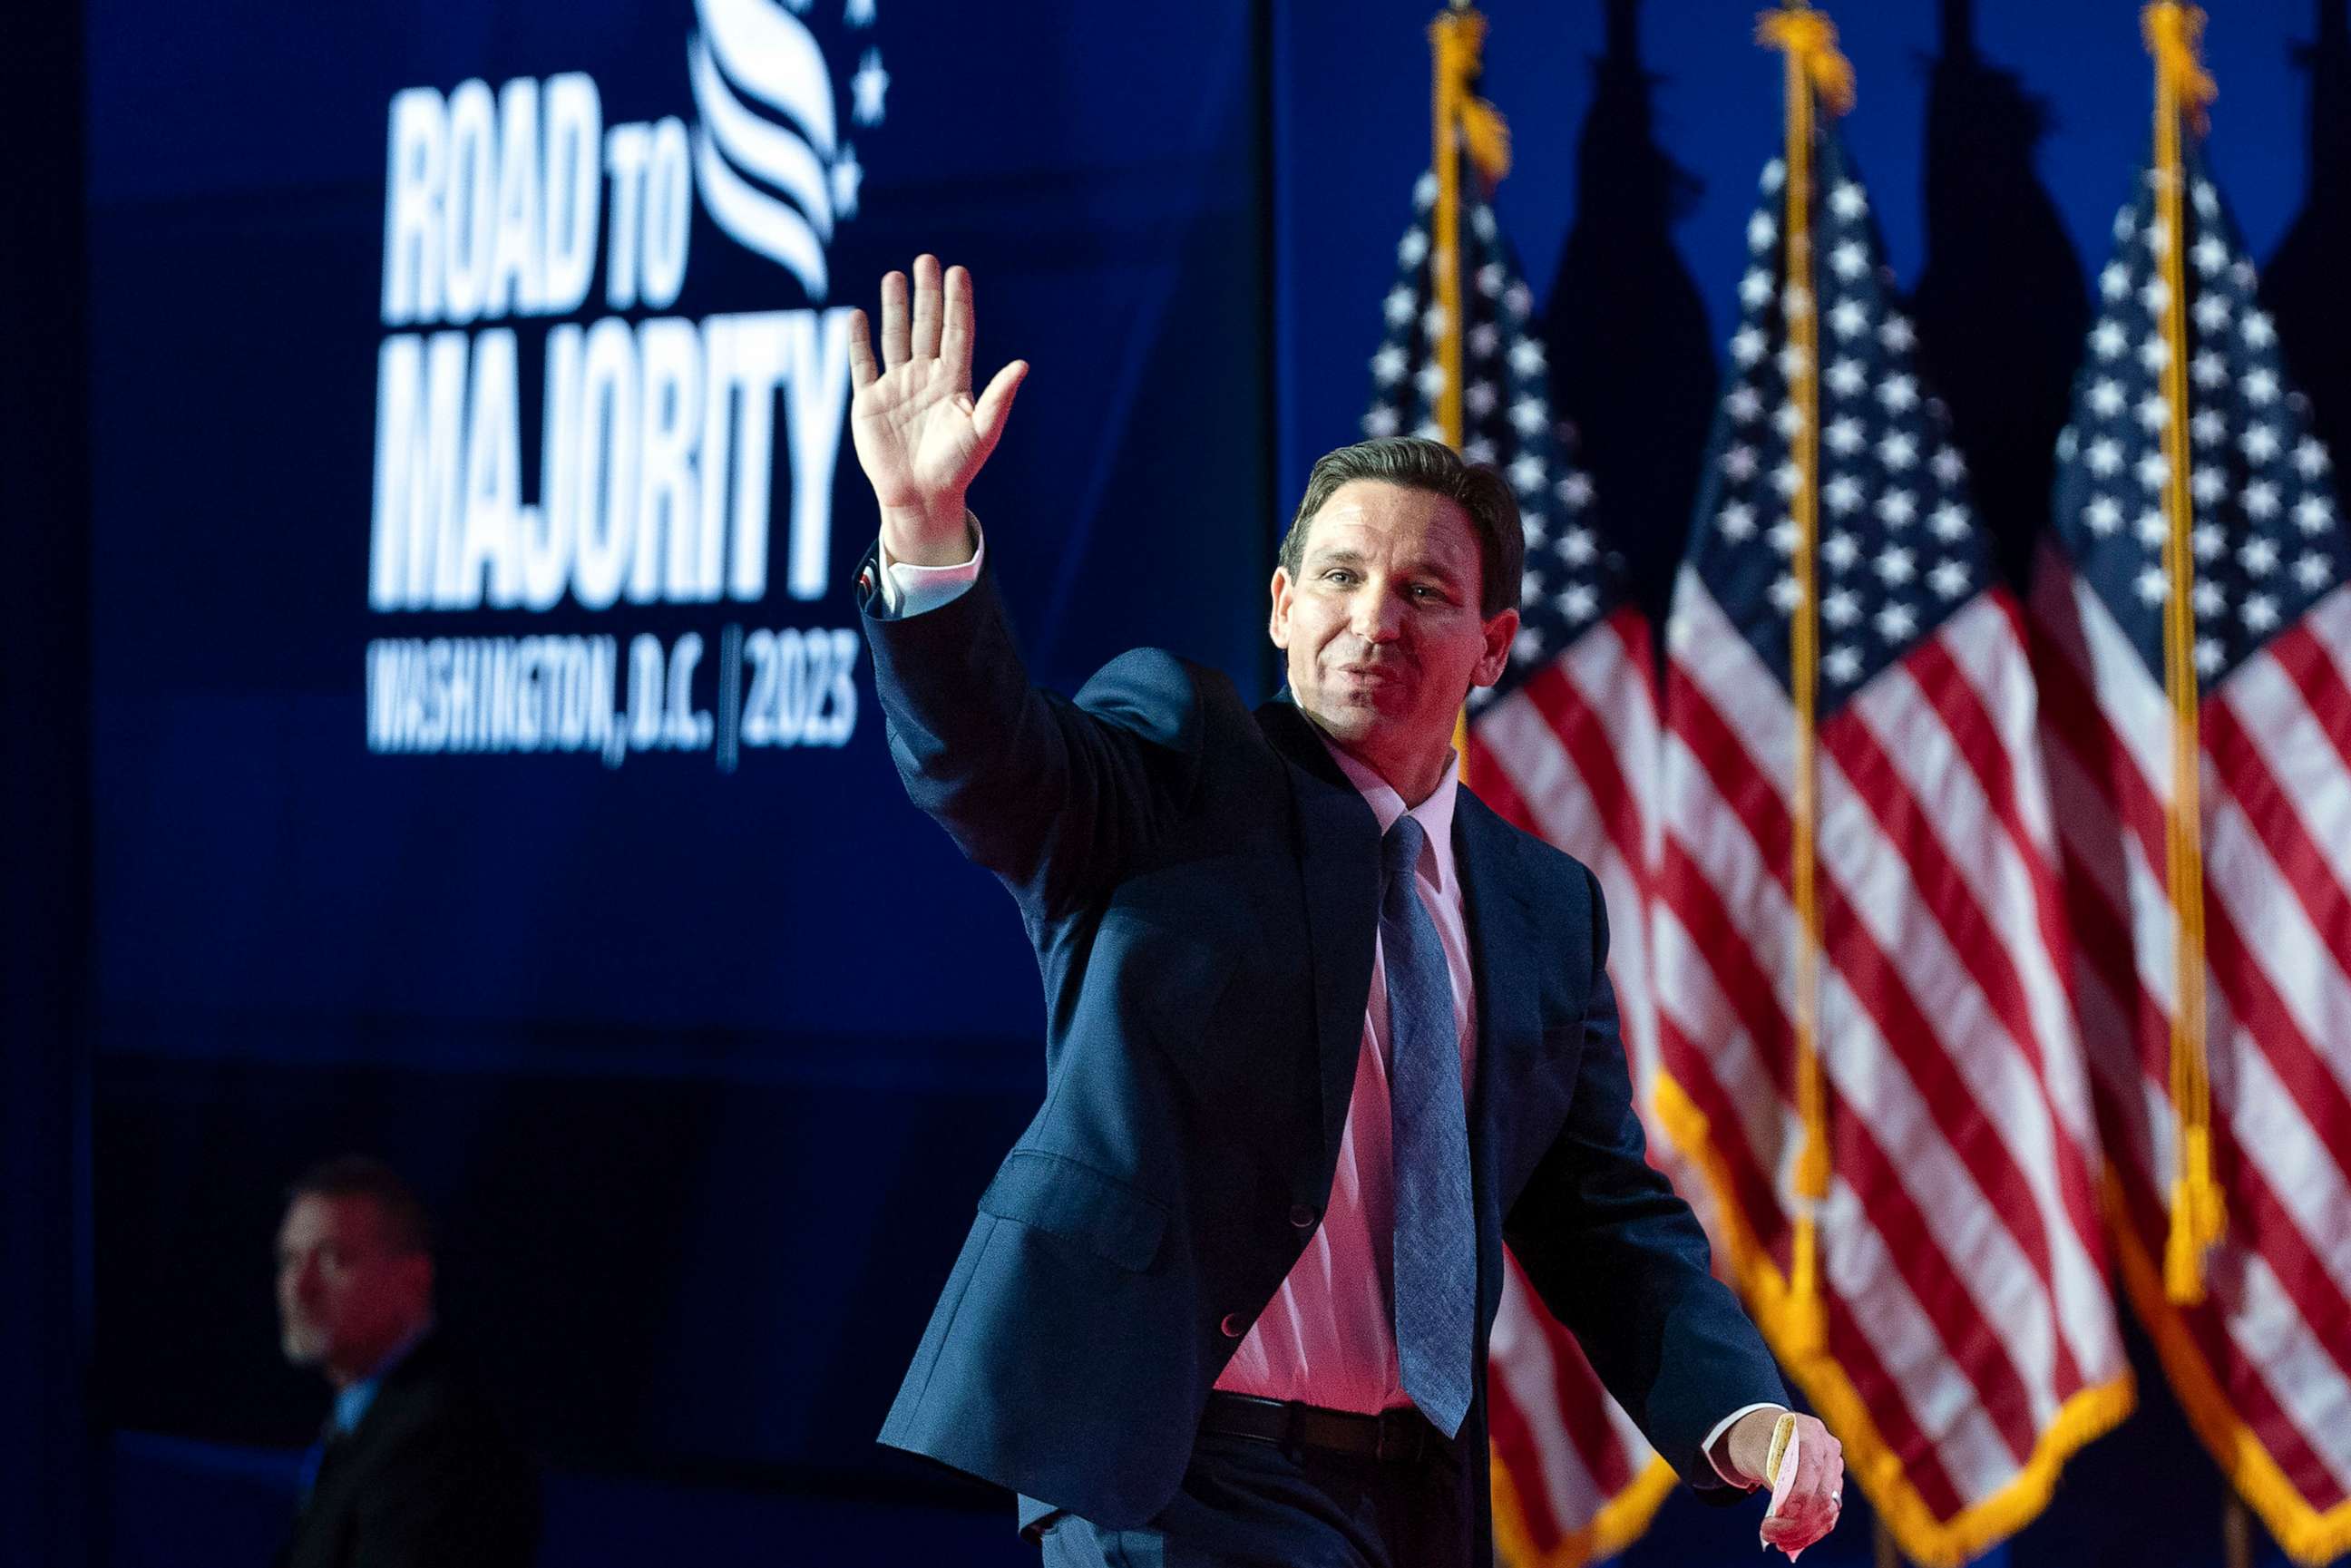 PHOTO: Republican presidential candidate Florida Gov. Ron DeSantis waves to supporters after speaking during the Faith and Freedom Coalition Policy Conference in Washington, D.C., June 23, 2023.